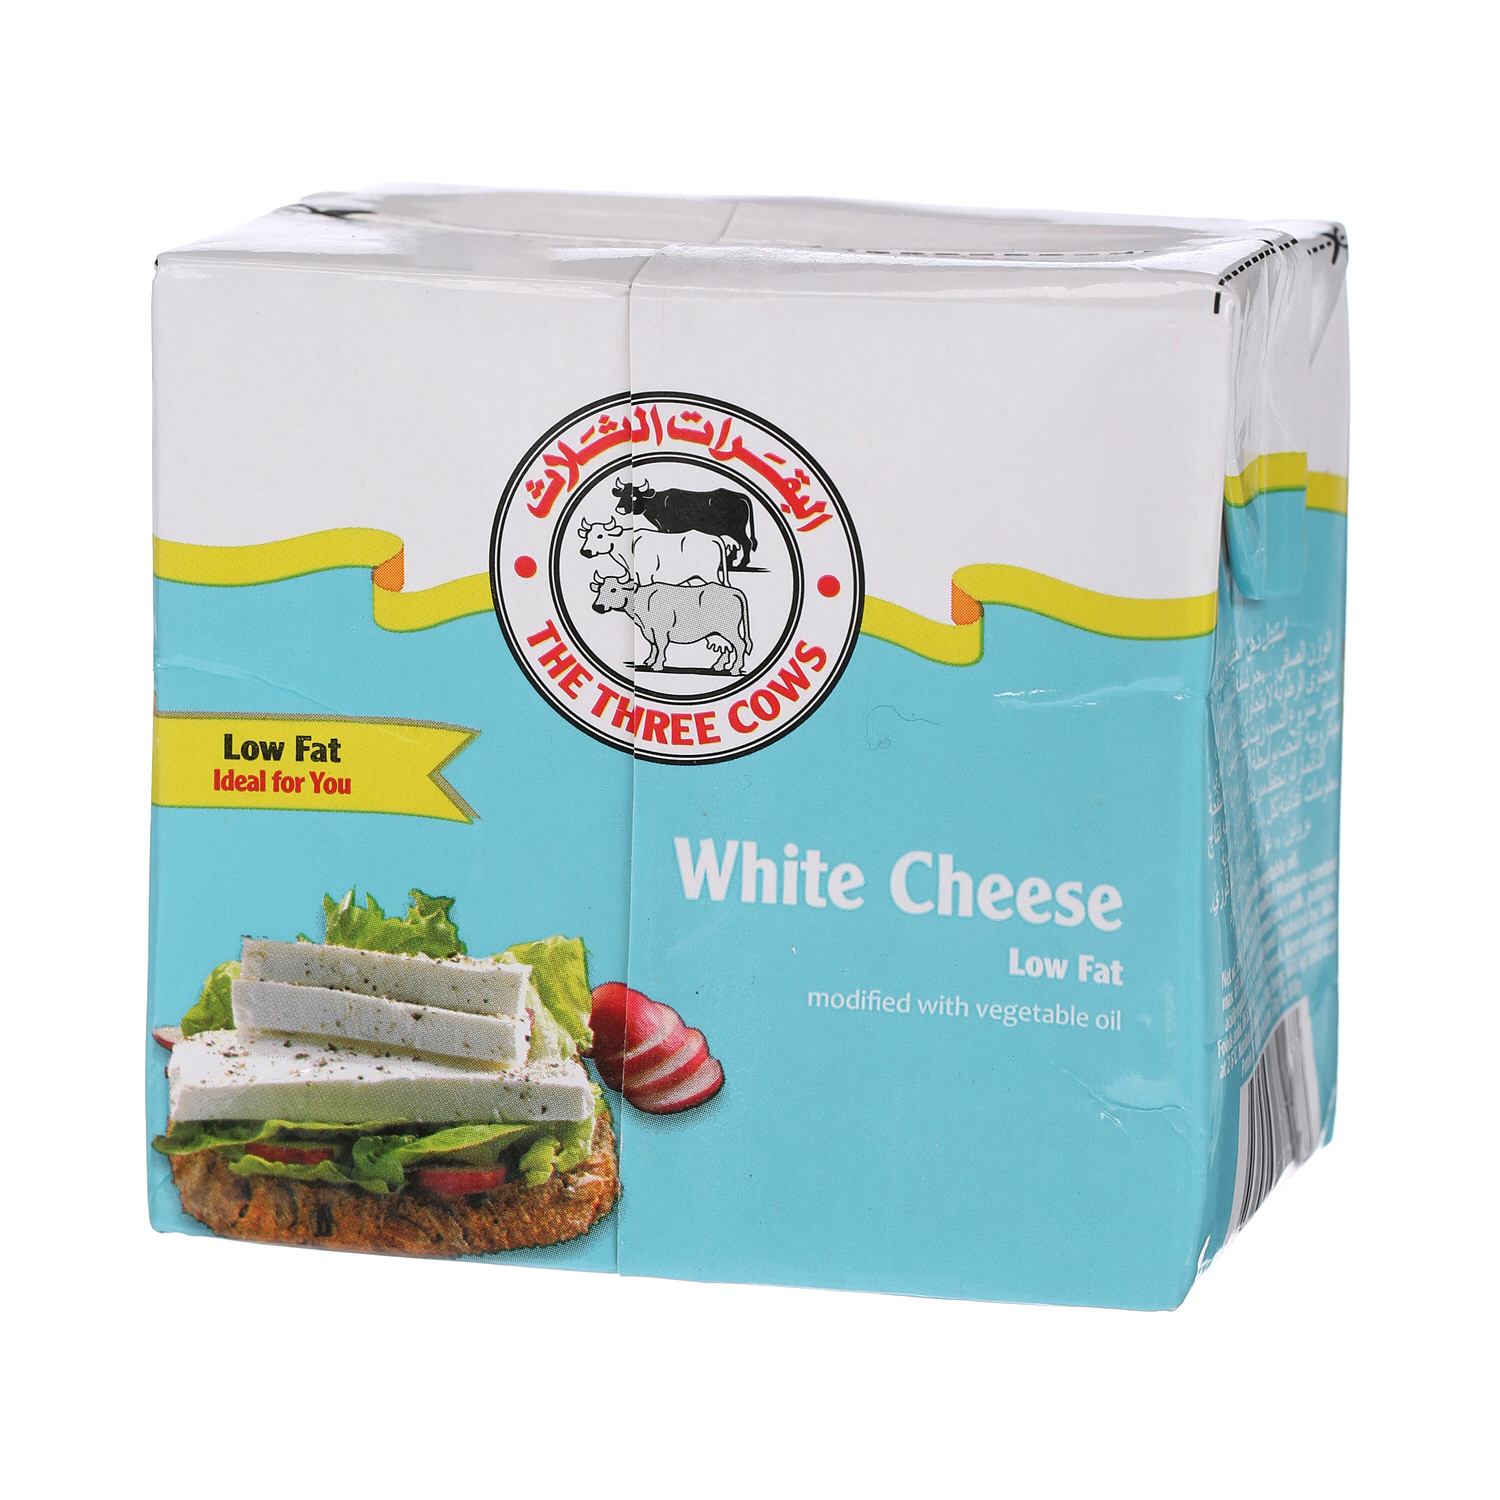 The Three Cows Feta Low Fat Cheese 500 g